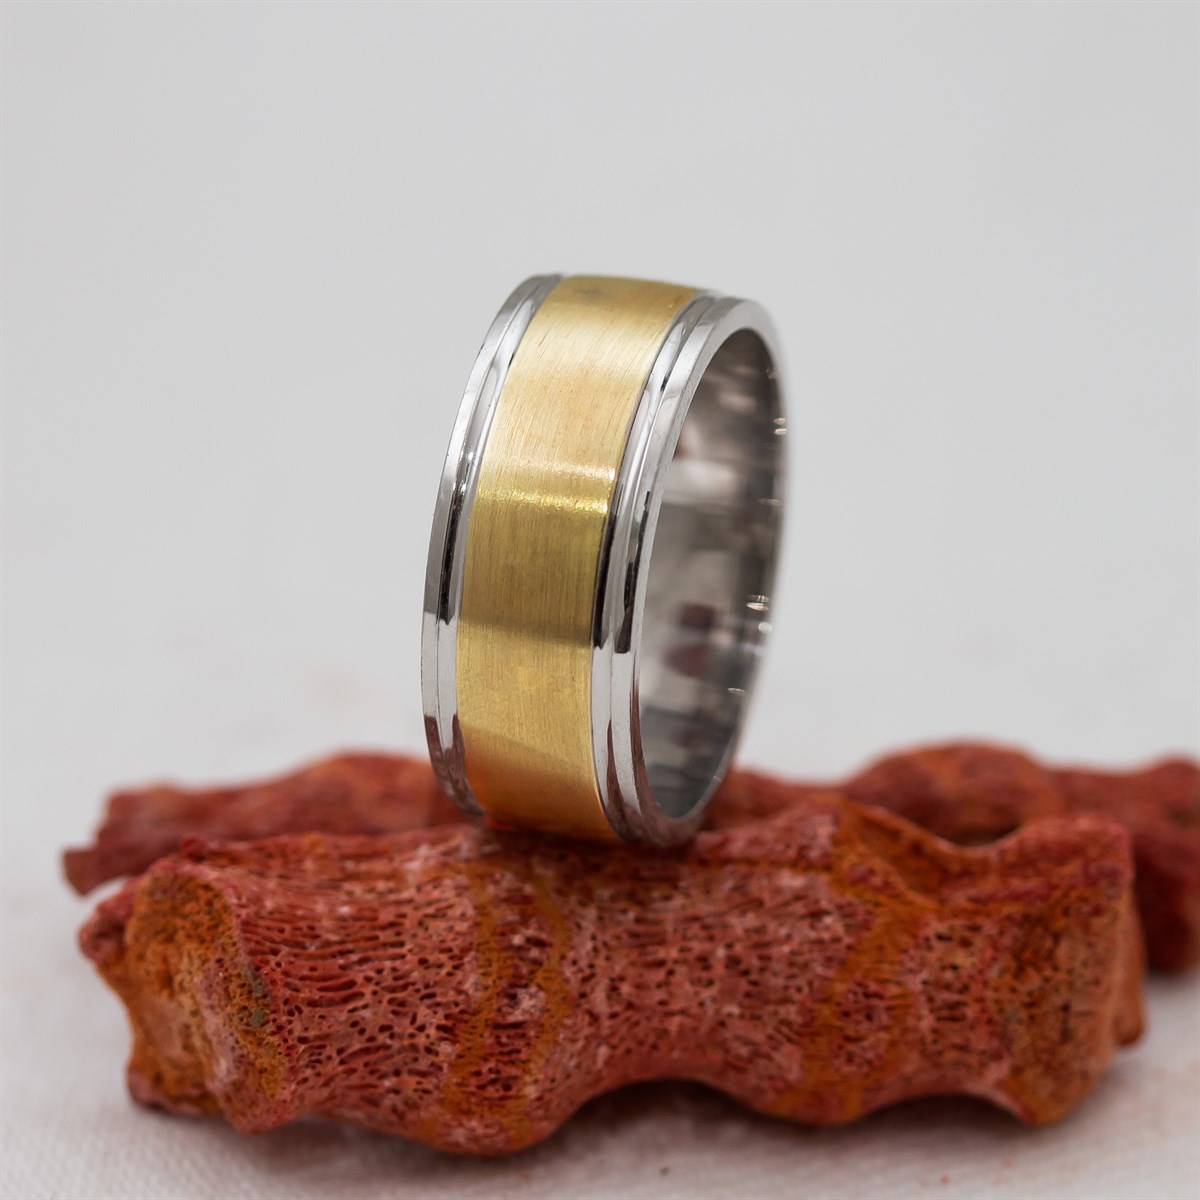 Unisex Silver Wedding Ring with Gold Color in the Middle